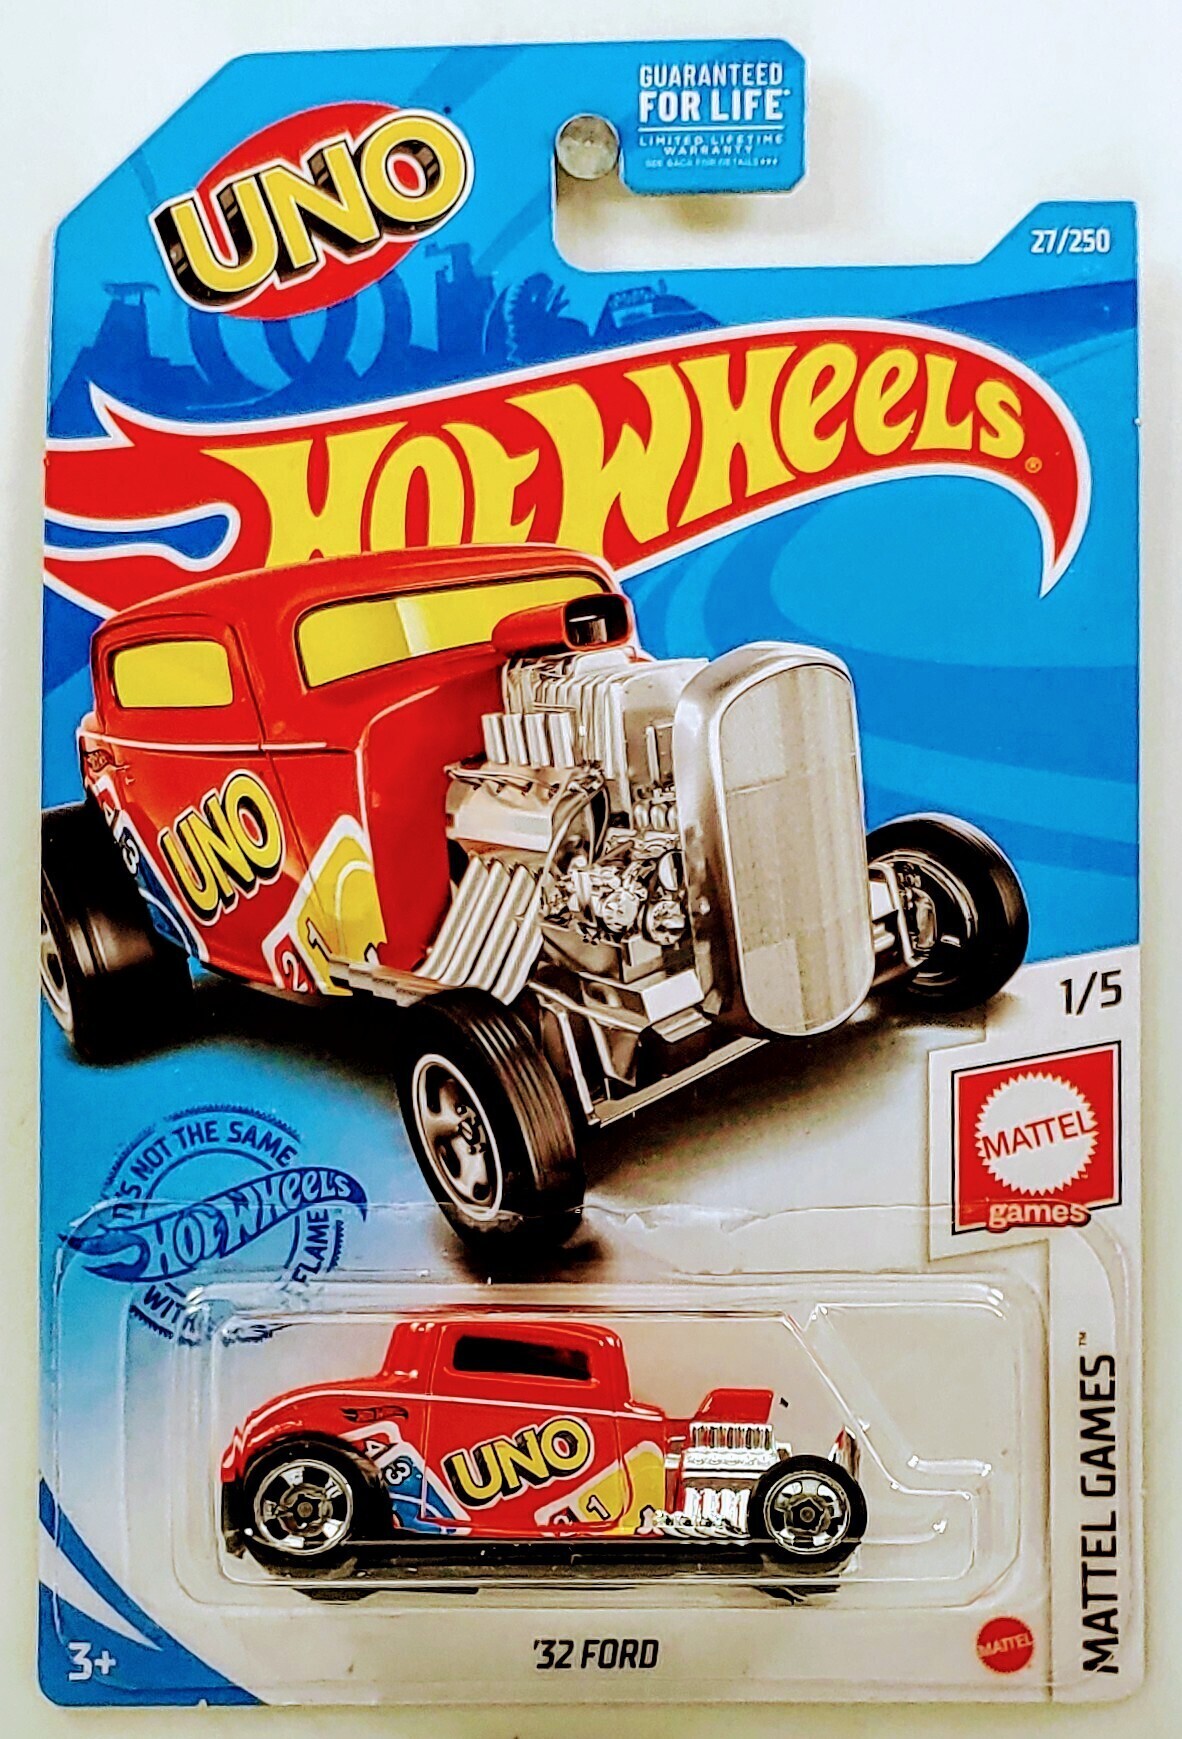 2021 Hot Wheels 27/250 '32 FORD Coupe 1/5 MATTEL GAMES DOS ~ Box Ships FREE!!